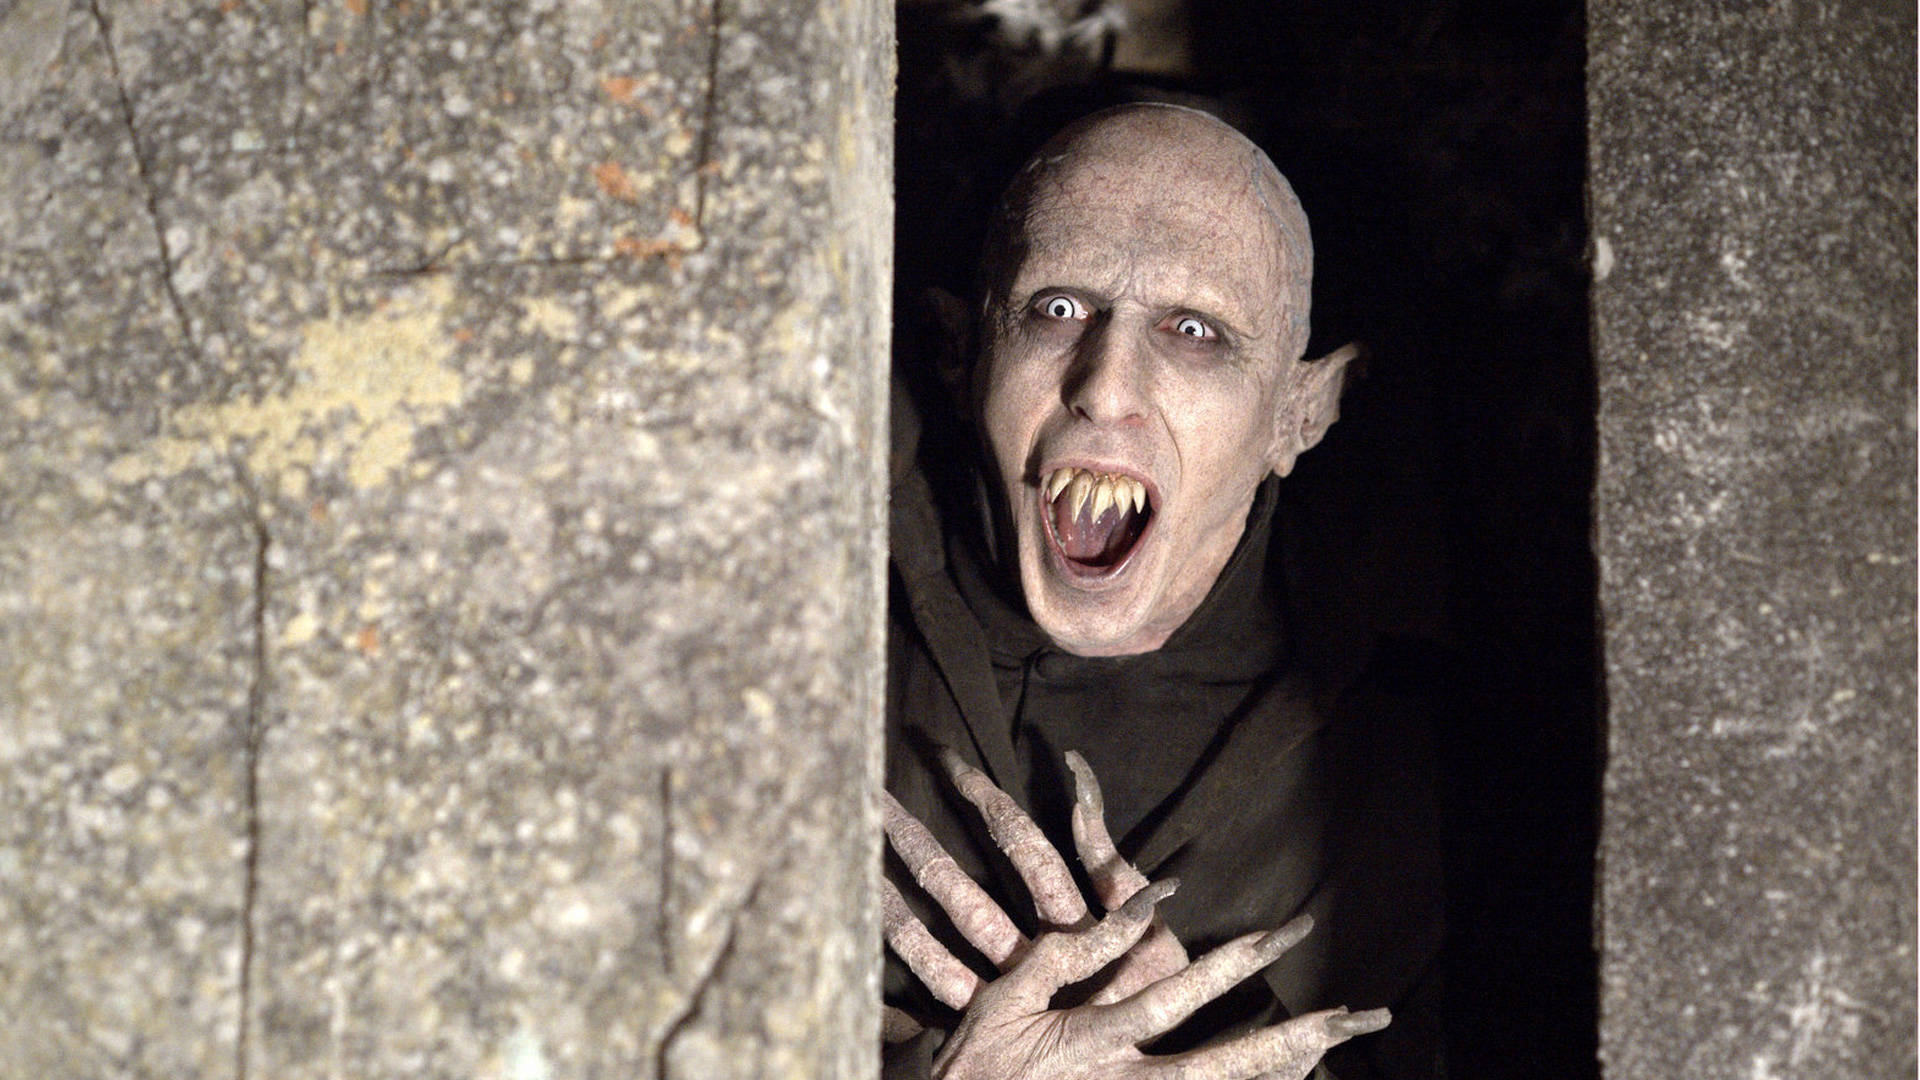 What We Do In The Shadows Shocked Petyr